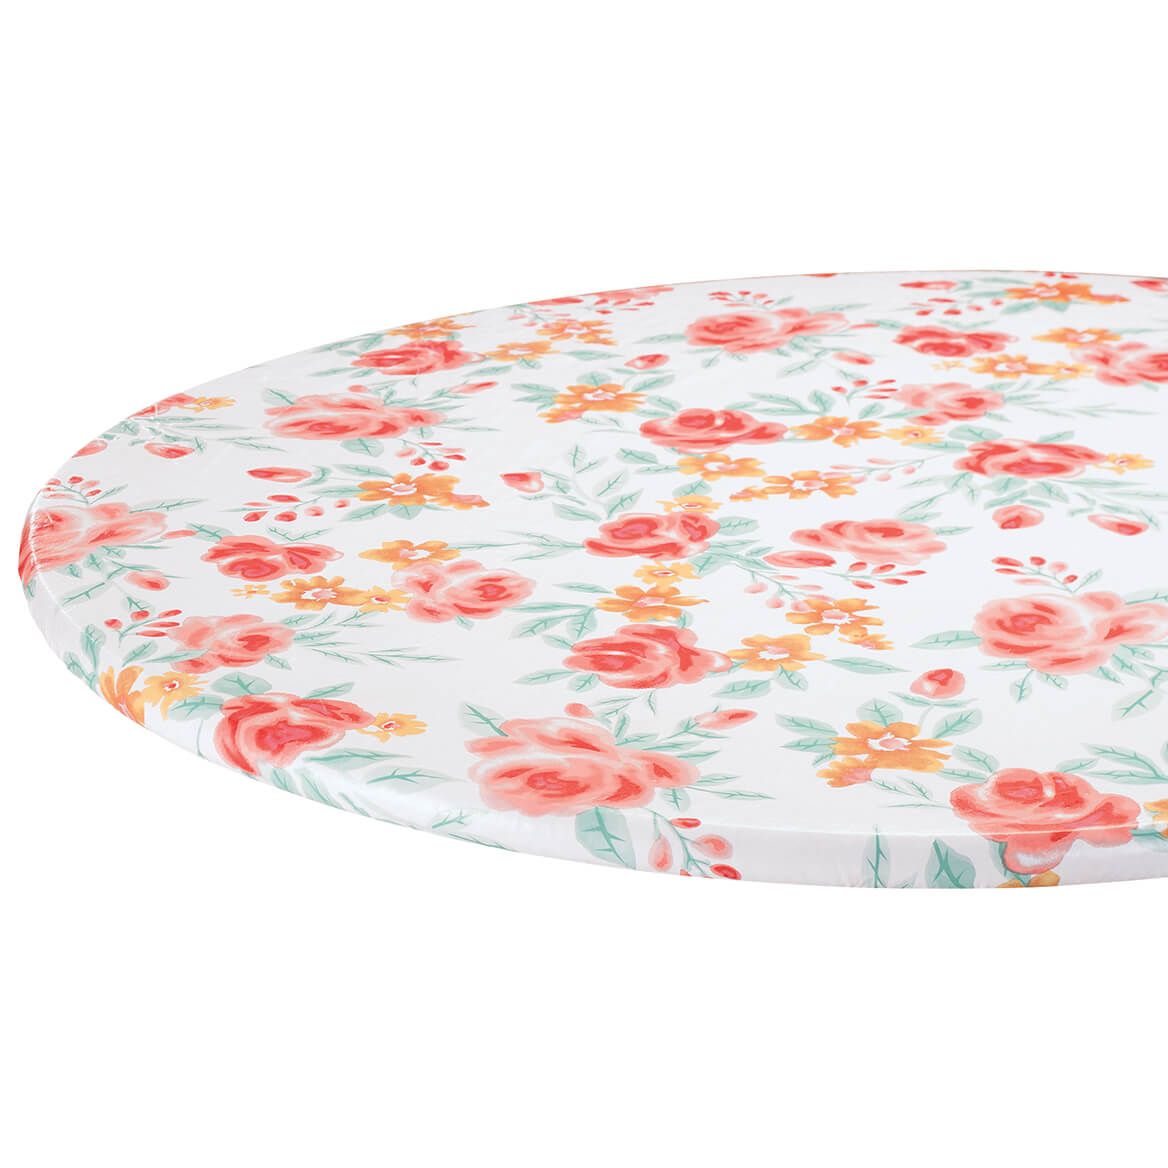 Watercolor Vinyl Elasticized Table Cover by HomeStyle Kitchen™ + '-' + 366971